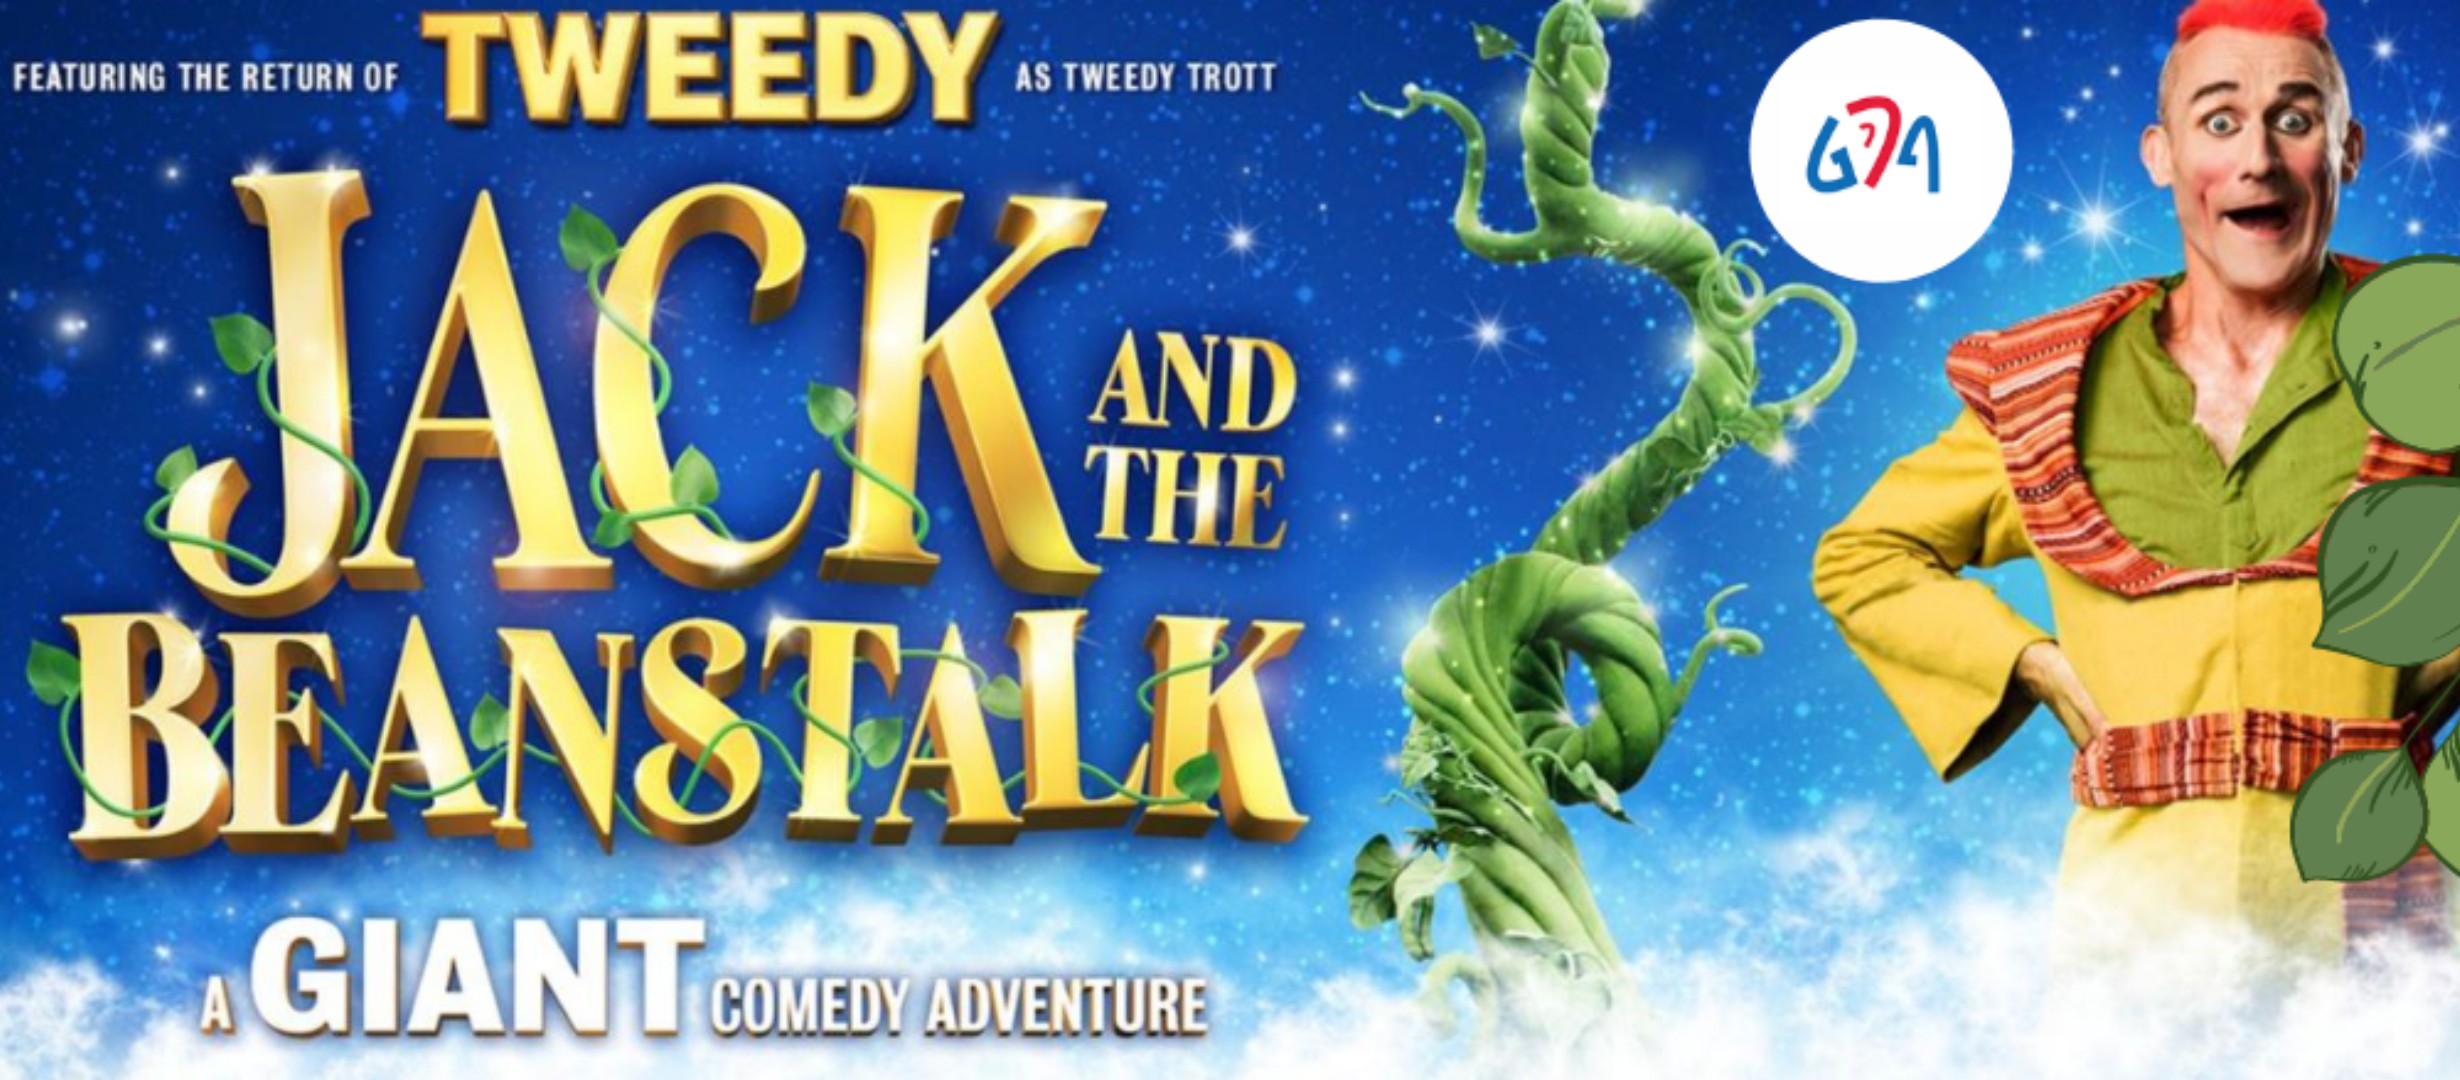 Featuring The Return of Tweedy as Tweedy Trott - Jack and the Beanstalk A Giant Comedy Adventure)